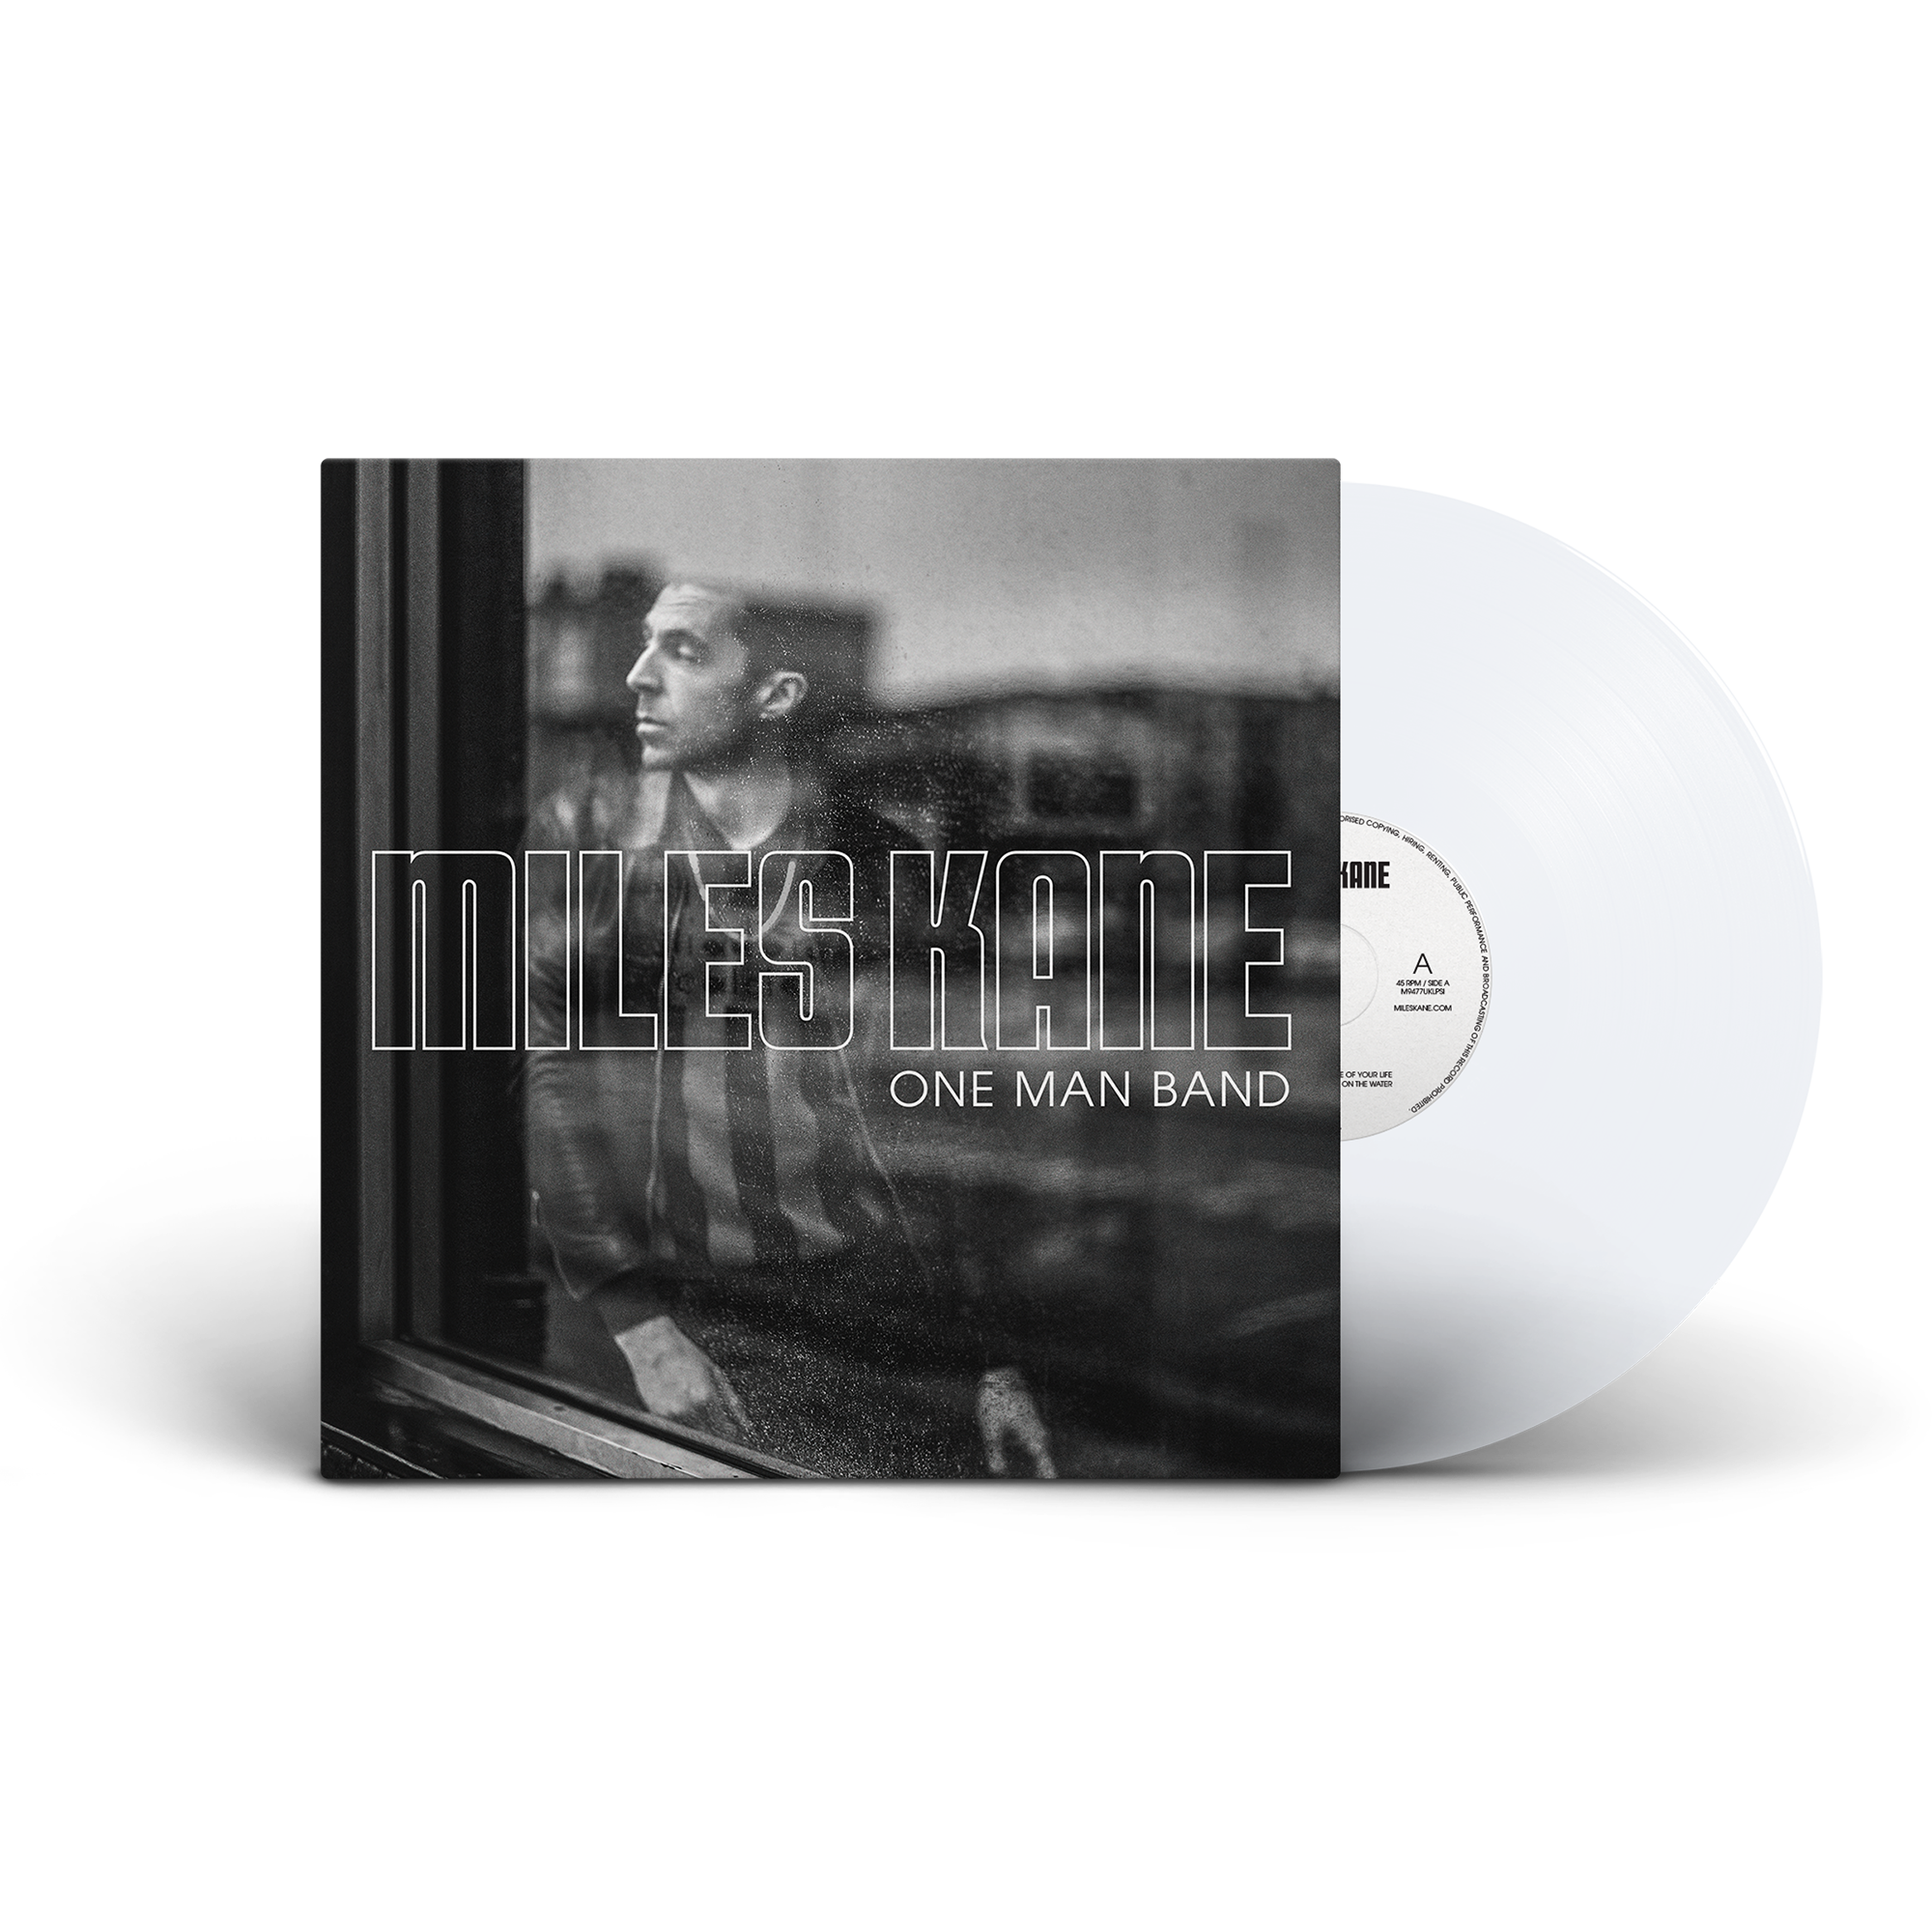 One Man Band: Limited Transparent Clear Vinyl LP + Signed Print